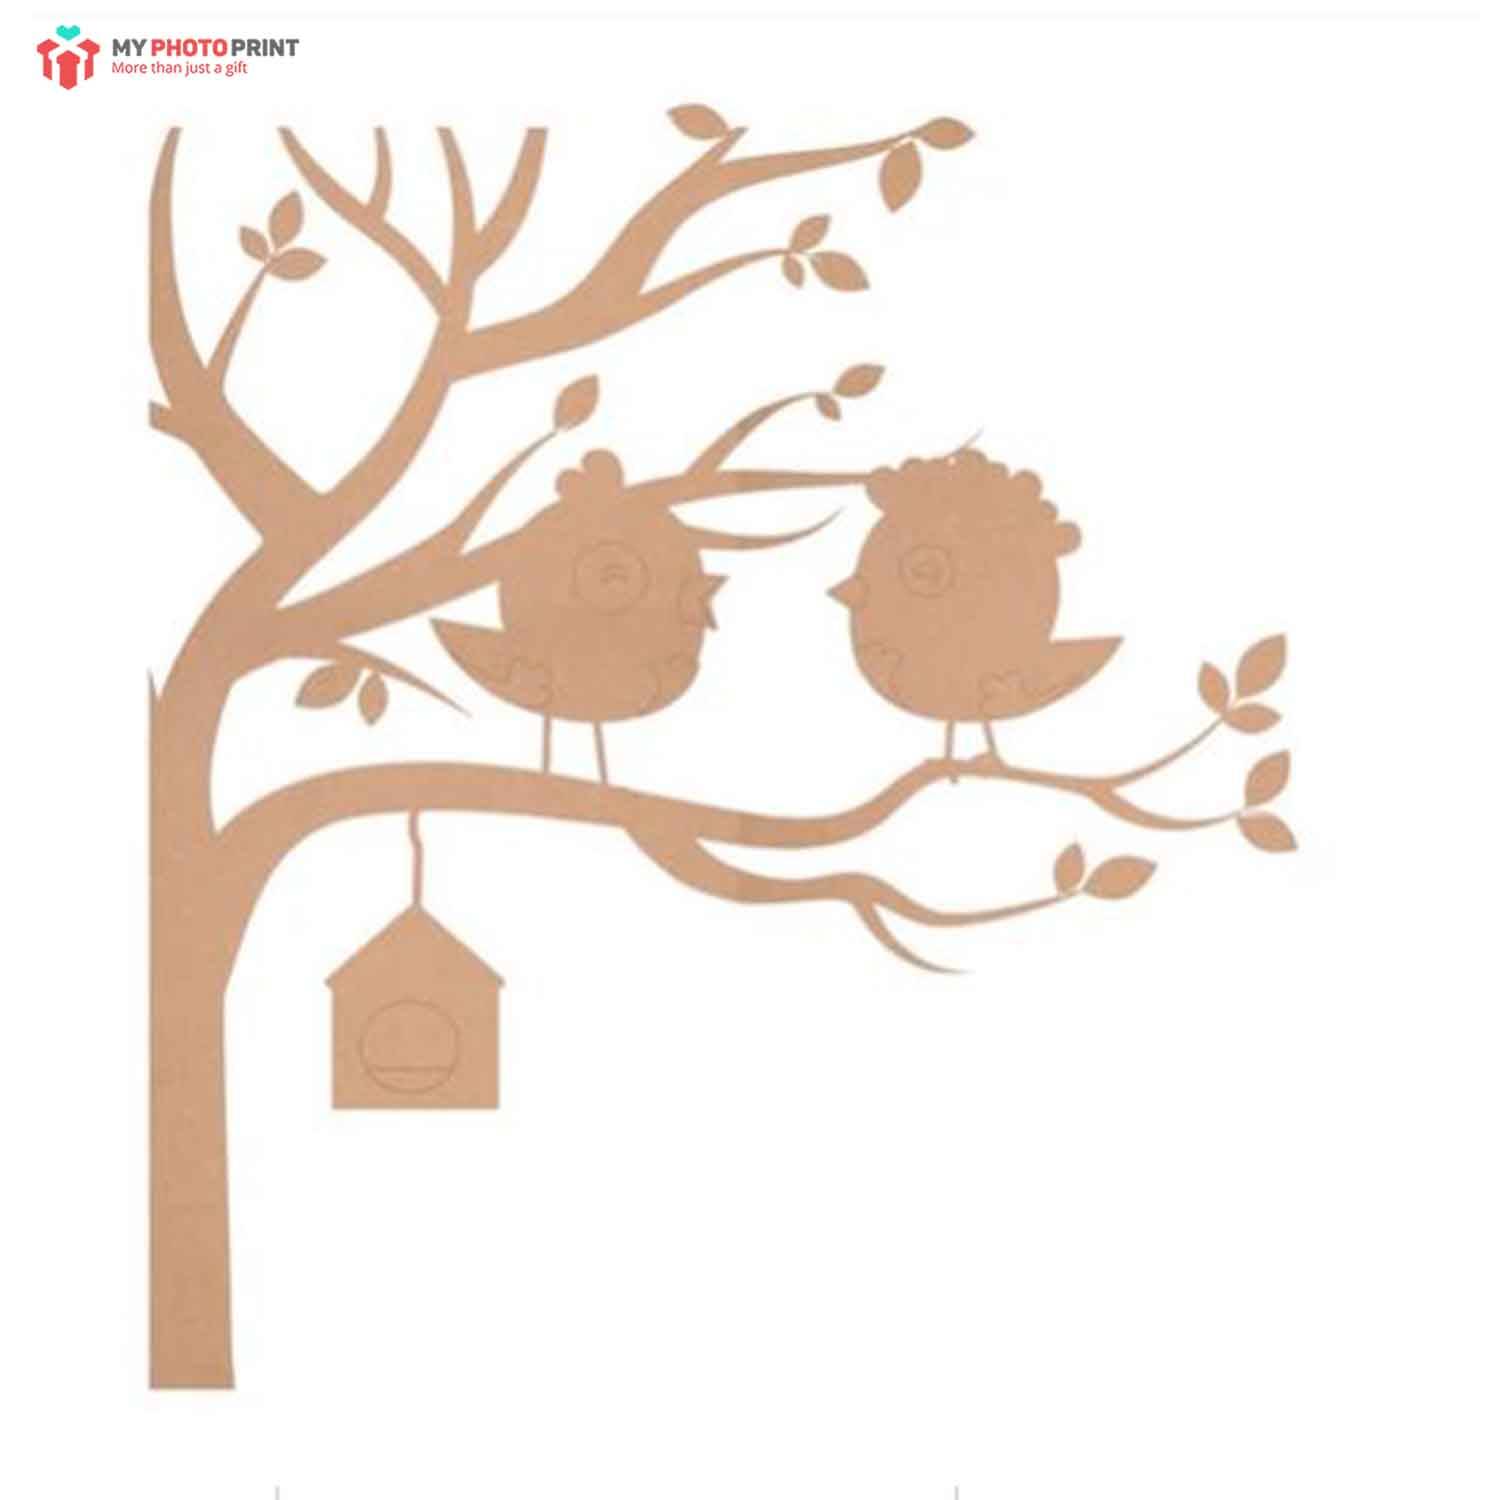 Tree And Birds MDF Wooden Craft Cutout Any Shapes & Patterns | Minimum Order 5 Pcs